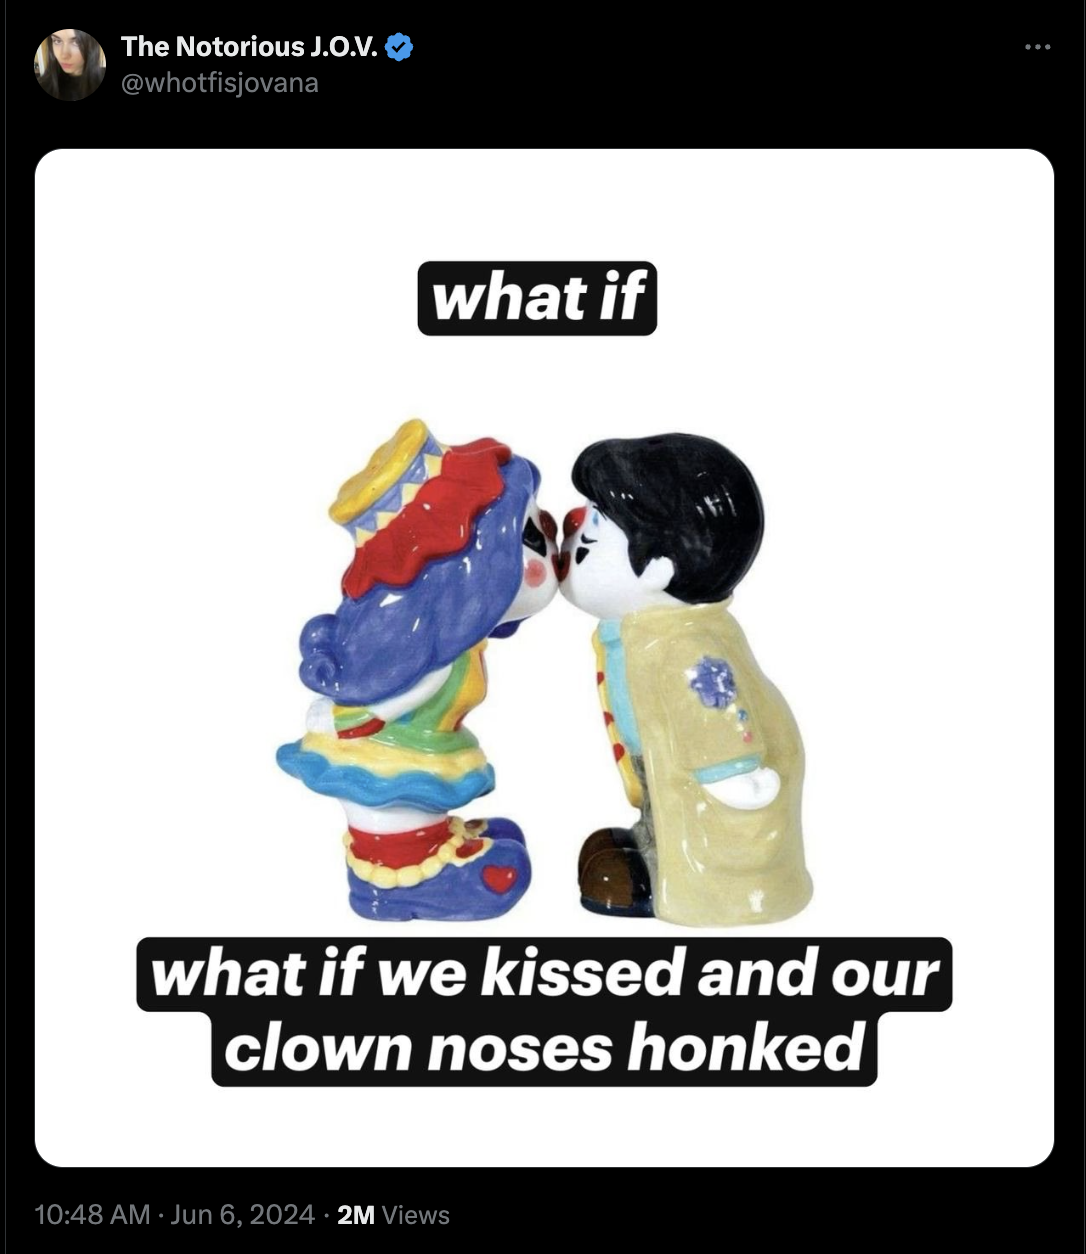 kissing clown salt and pepper shakers - The Notorious J.O.v. what if what if we kissed and our clown noses honked 2M Views